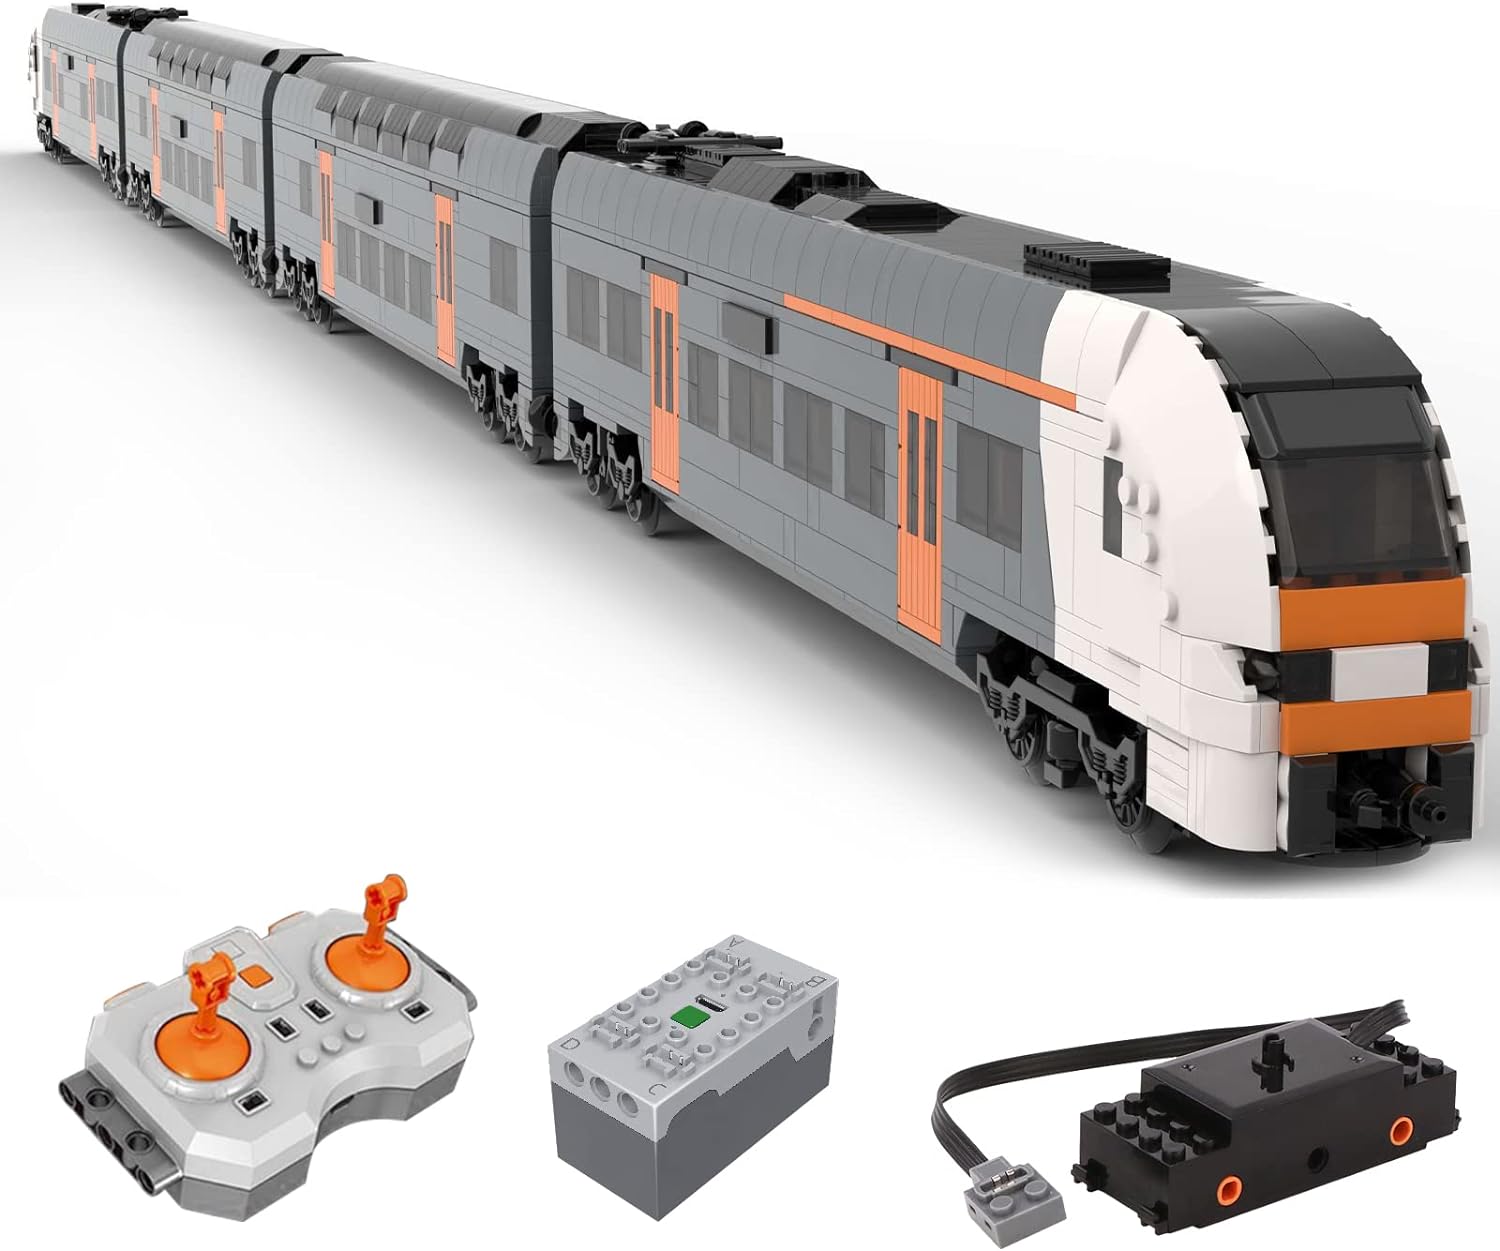 PHYNEDI Railway Series RC 6wide DB ICE 1 - German High-Speed Train Bricks Model with Motorset, MOC DIY Creative Collection Vehicle Building Toy Compatible with Lego, MOC-64784 (2736 Pieces)